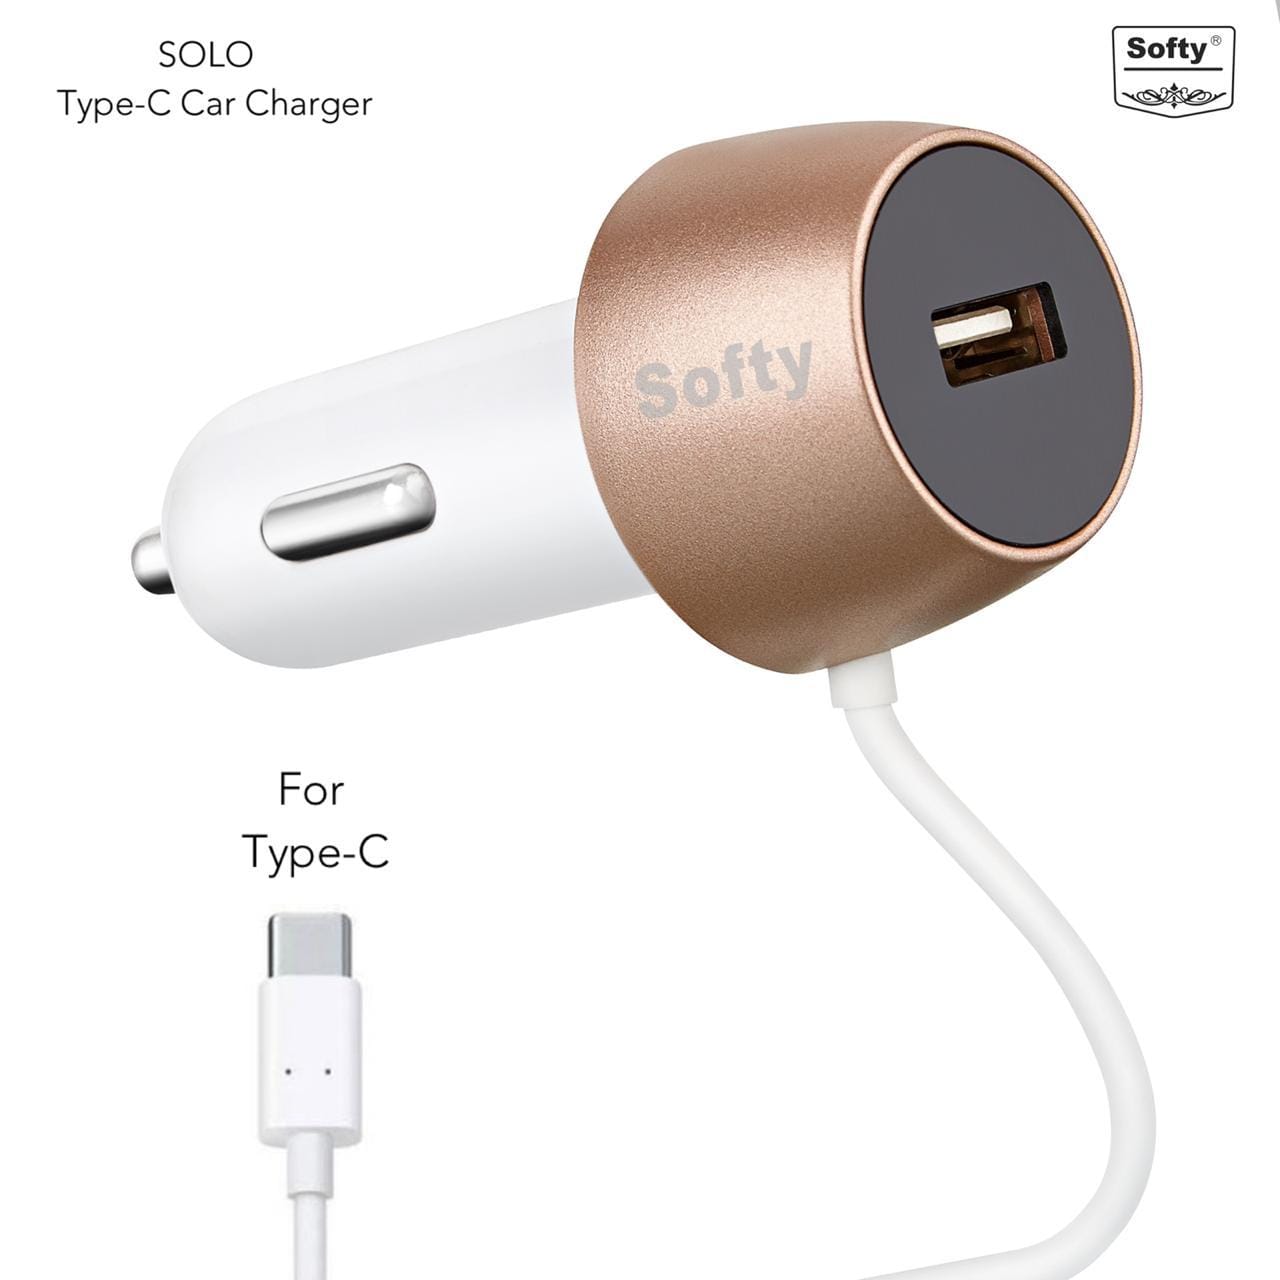 Softy premium quality 2.1-Amp Type-C car charger with wire-USB CAR CHARGERS-dealsplant